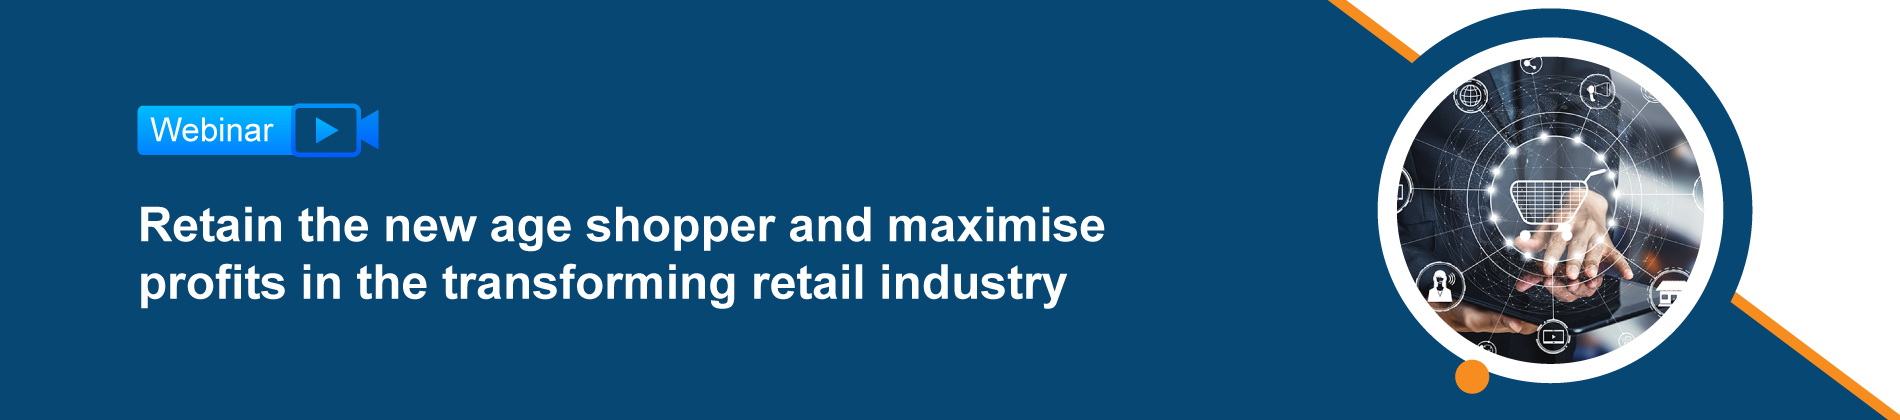 Retain the new age shopper and maximise profits in the transforming retail industry